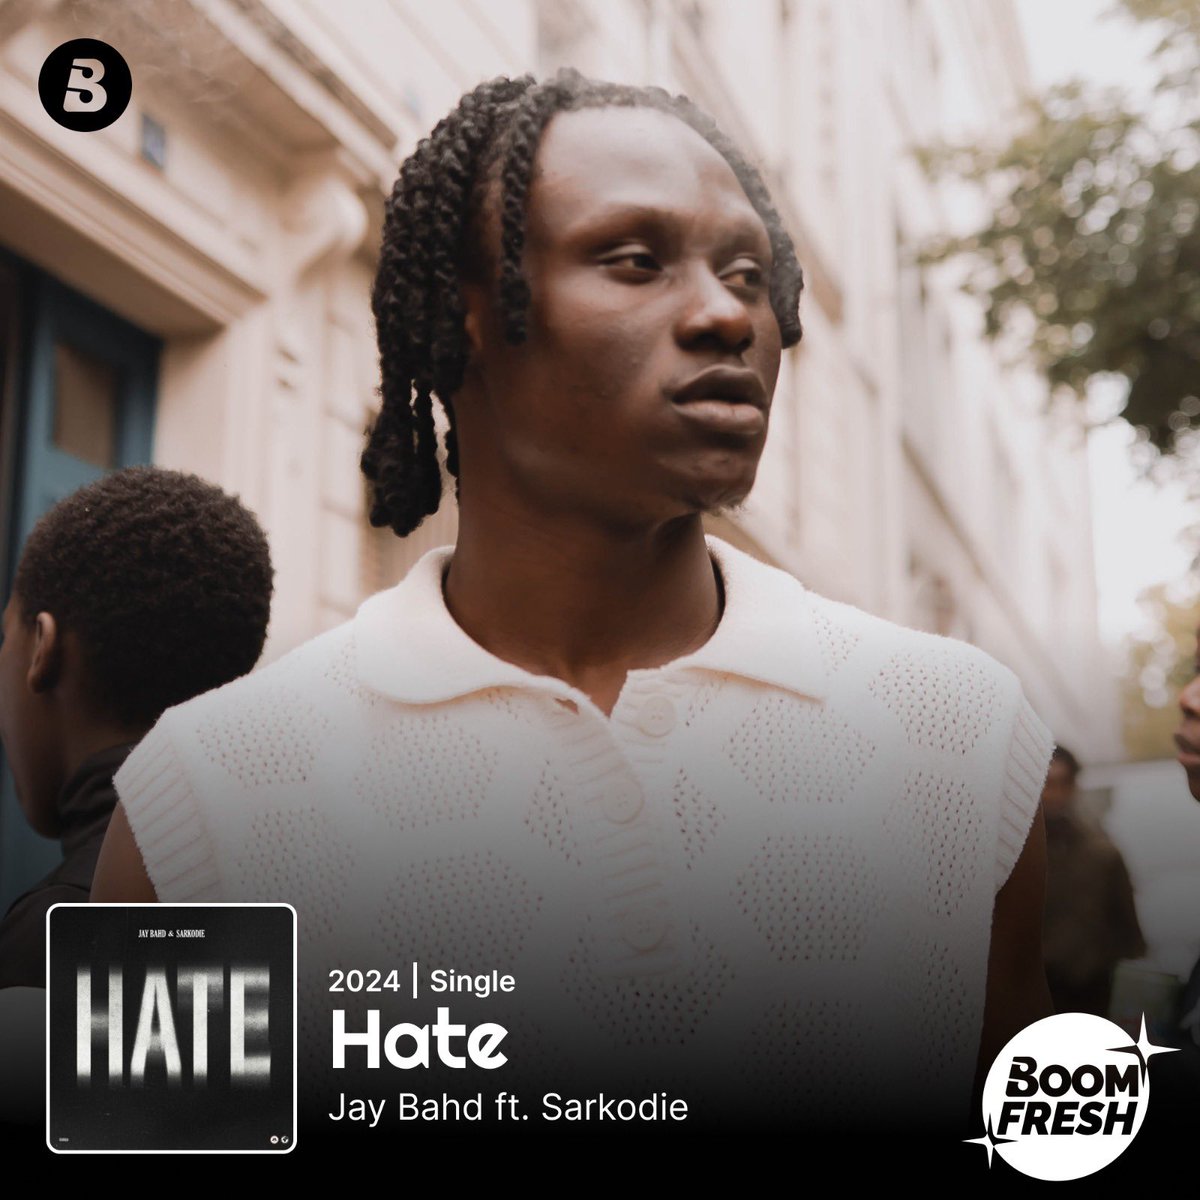 💥BOOMFRESH💥 @JayBahd1 drops a new one with the Landlord @sarkodie titled #Hate. Listen now on #Boomplay 🔥. 🎧: Boom.lnk.to/JayBahdHate #NewMusicFriday #HomeOfMusic